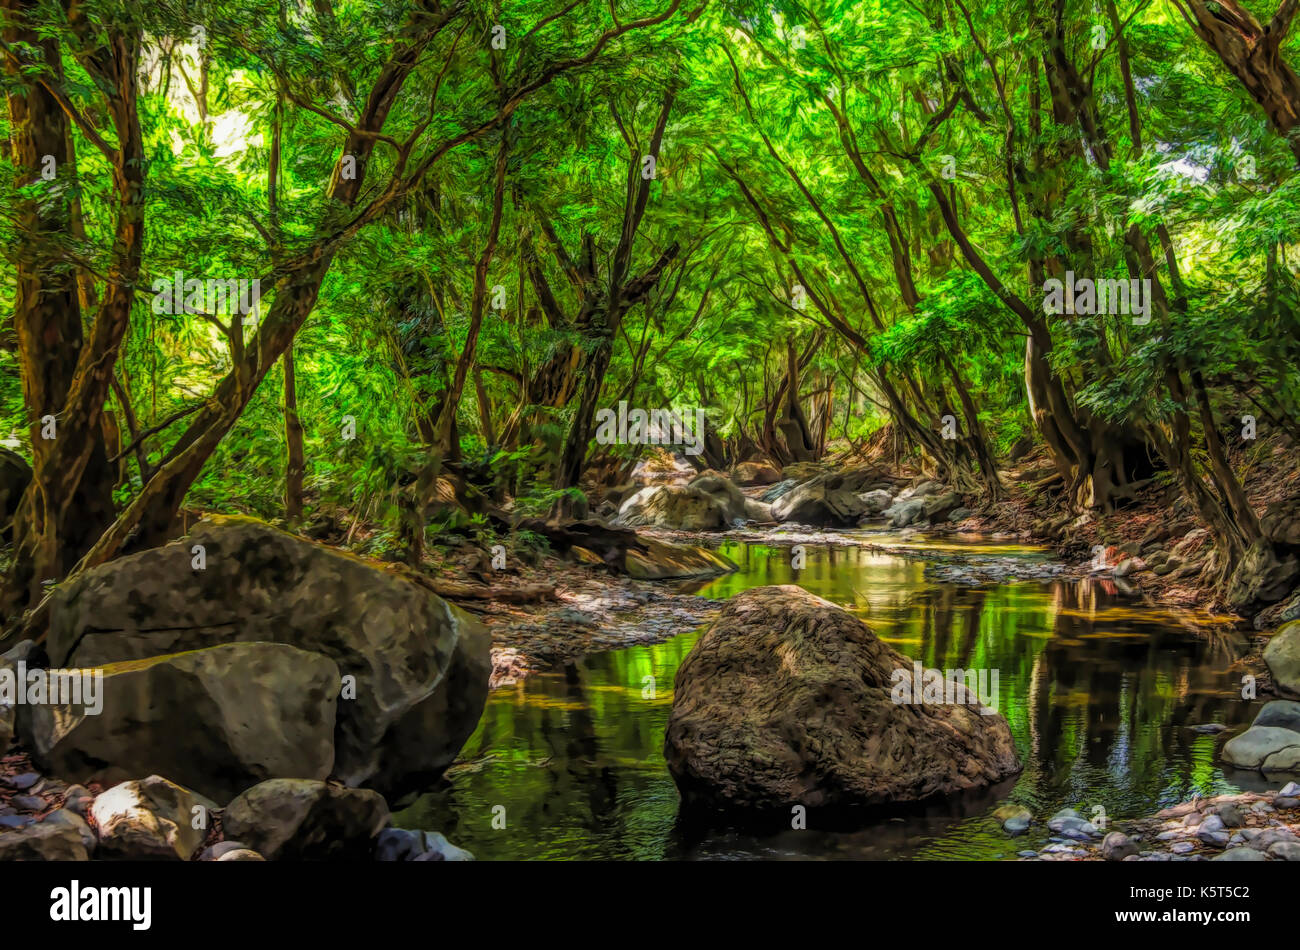 Creek in light forest scene like a drawing illustration Stock Photo